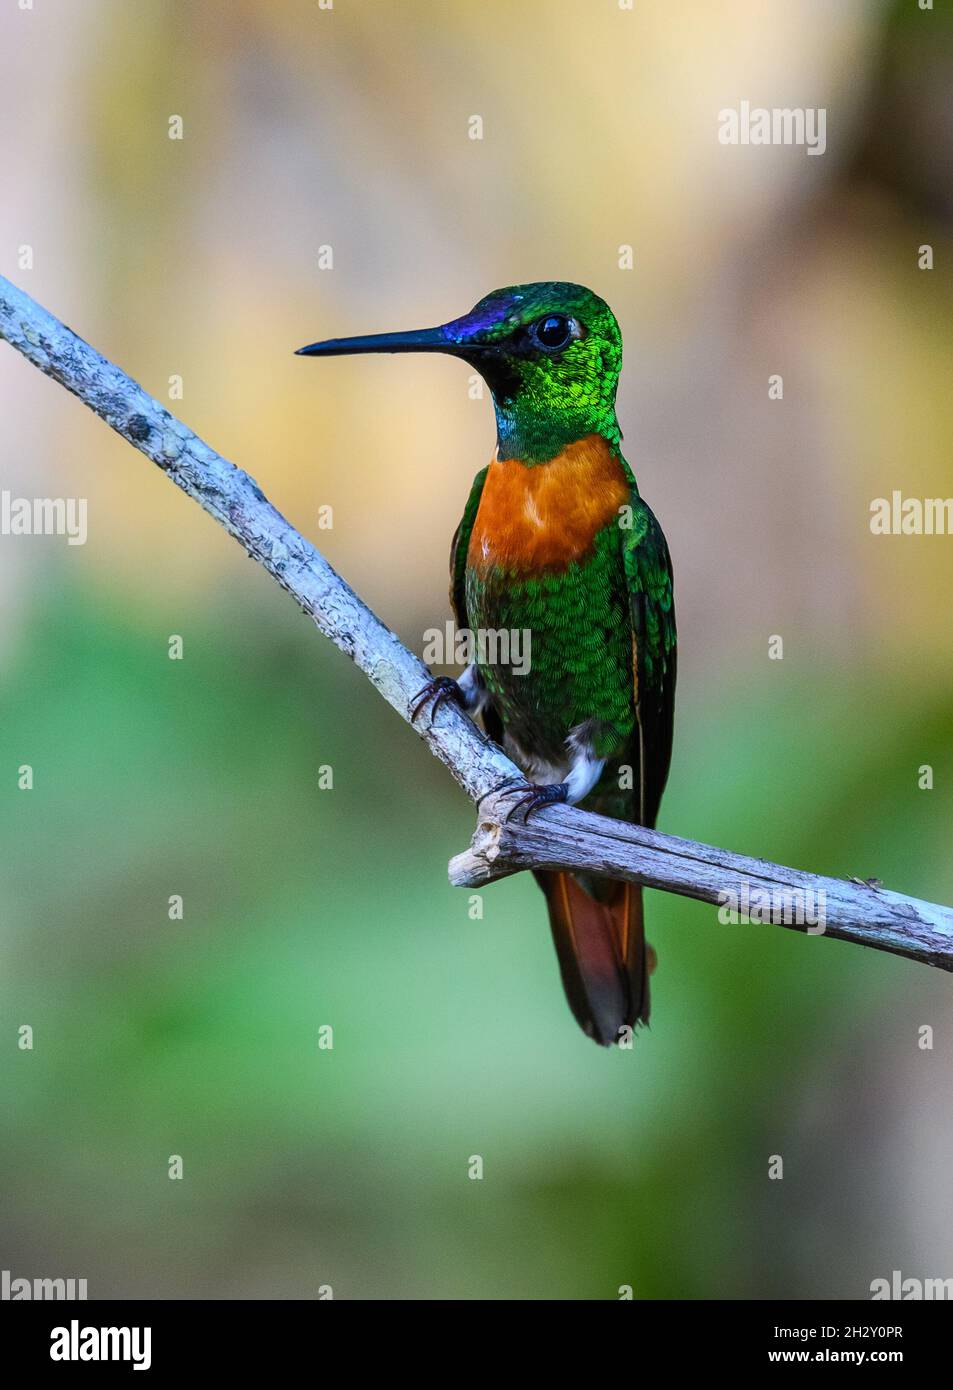 A Gould's Jewelfront (Heliodoxa aurescens) hummingbird perched on a branch. Cuzco, Peru, South America. Stock Photo